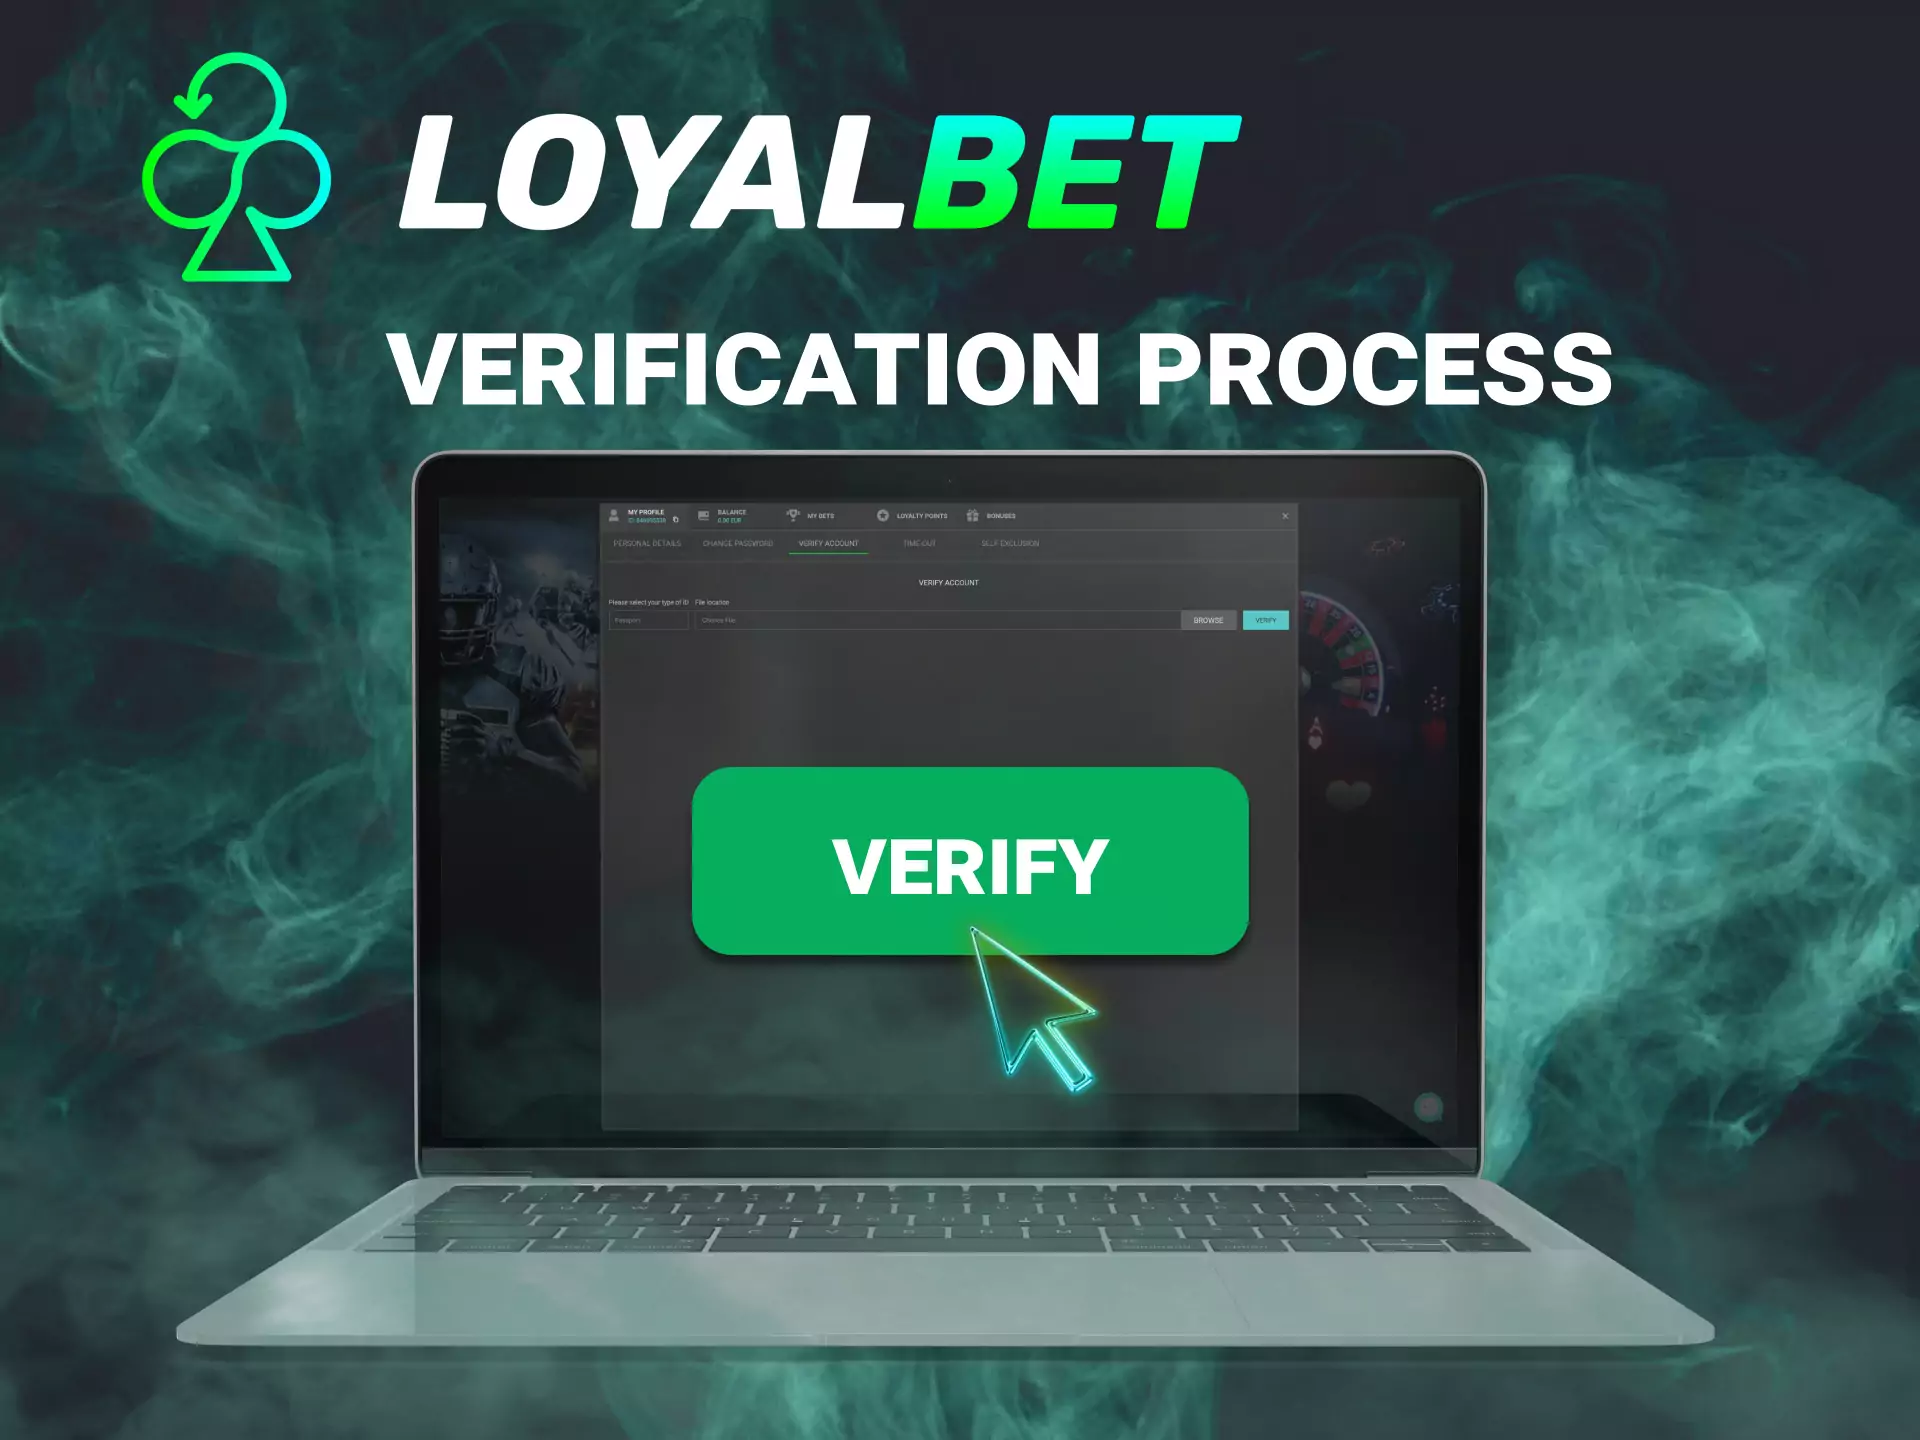 After creating an account, verify it to be allowed to enjoy the Loyalbet entertainment.